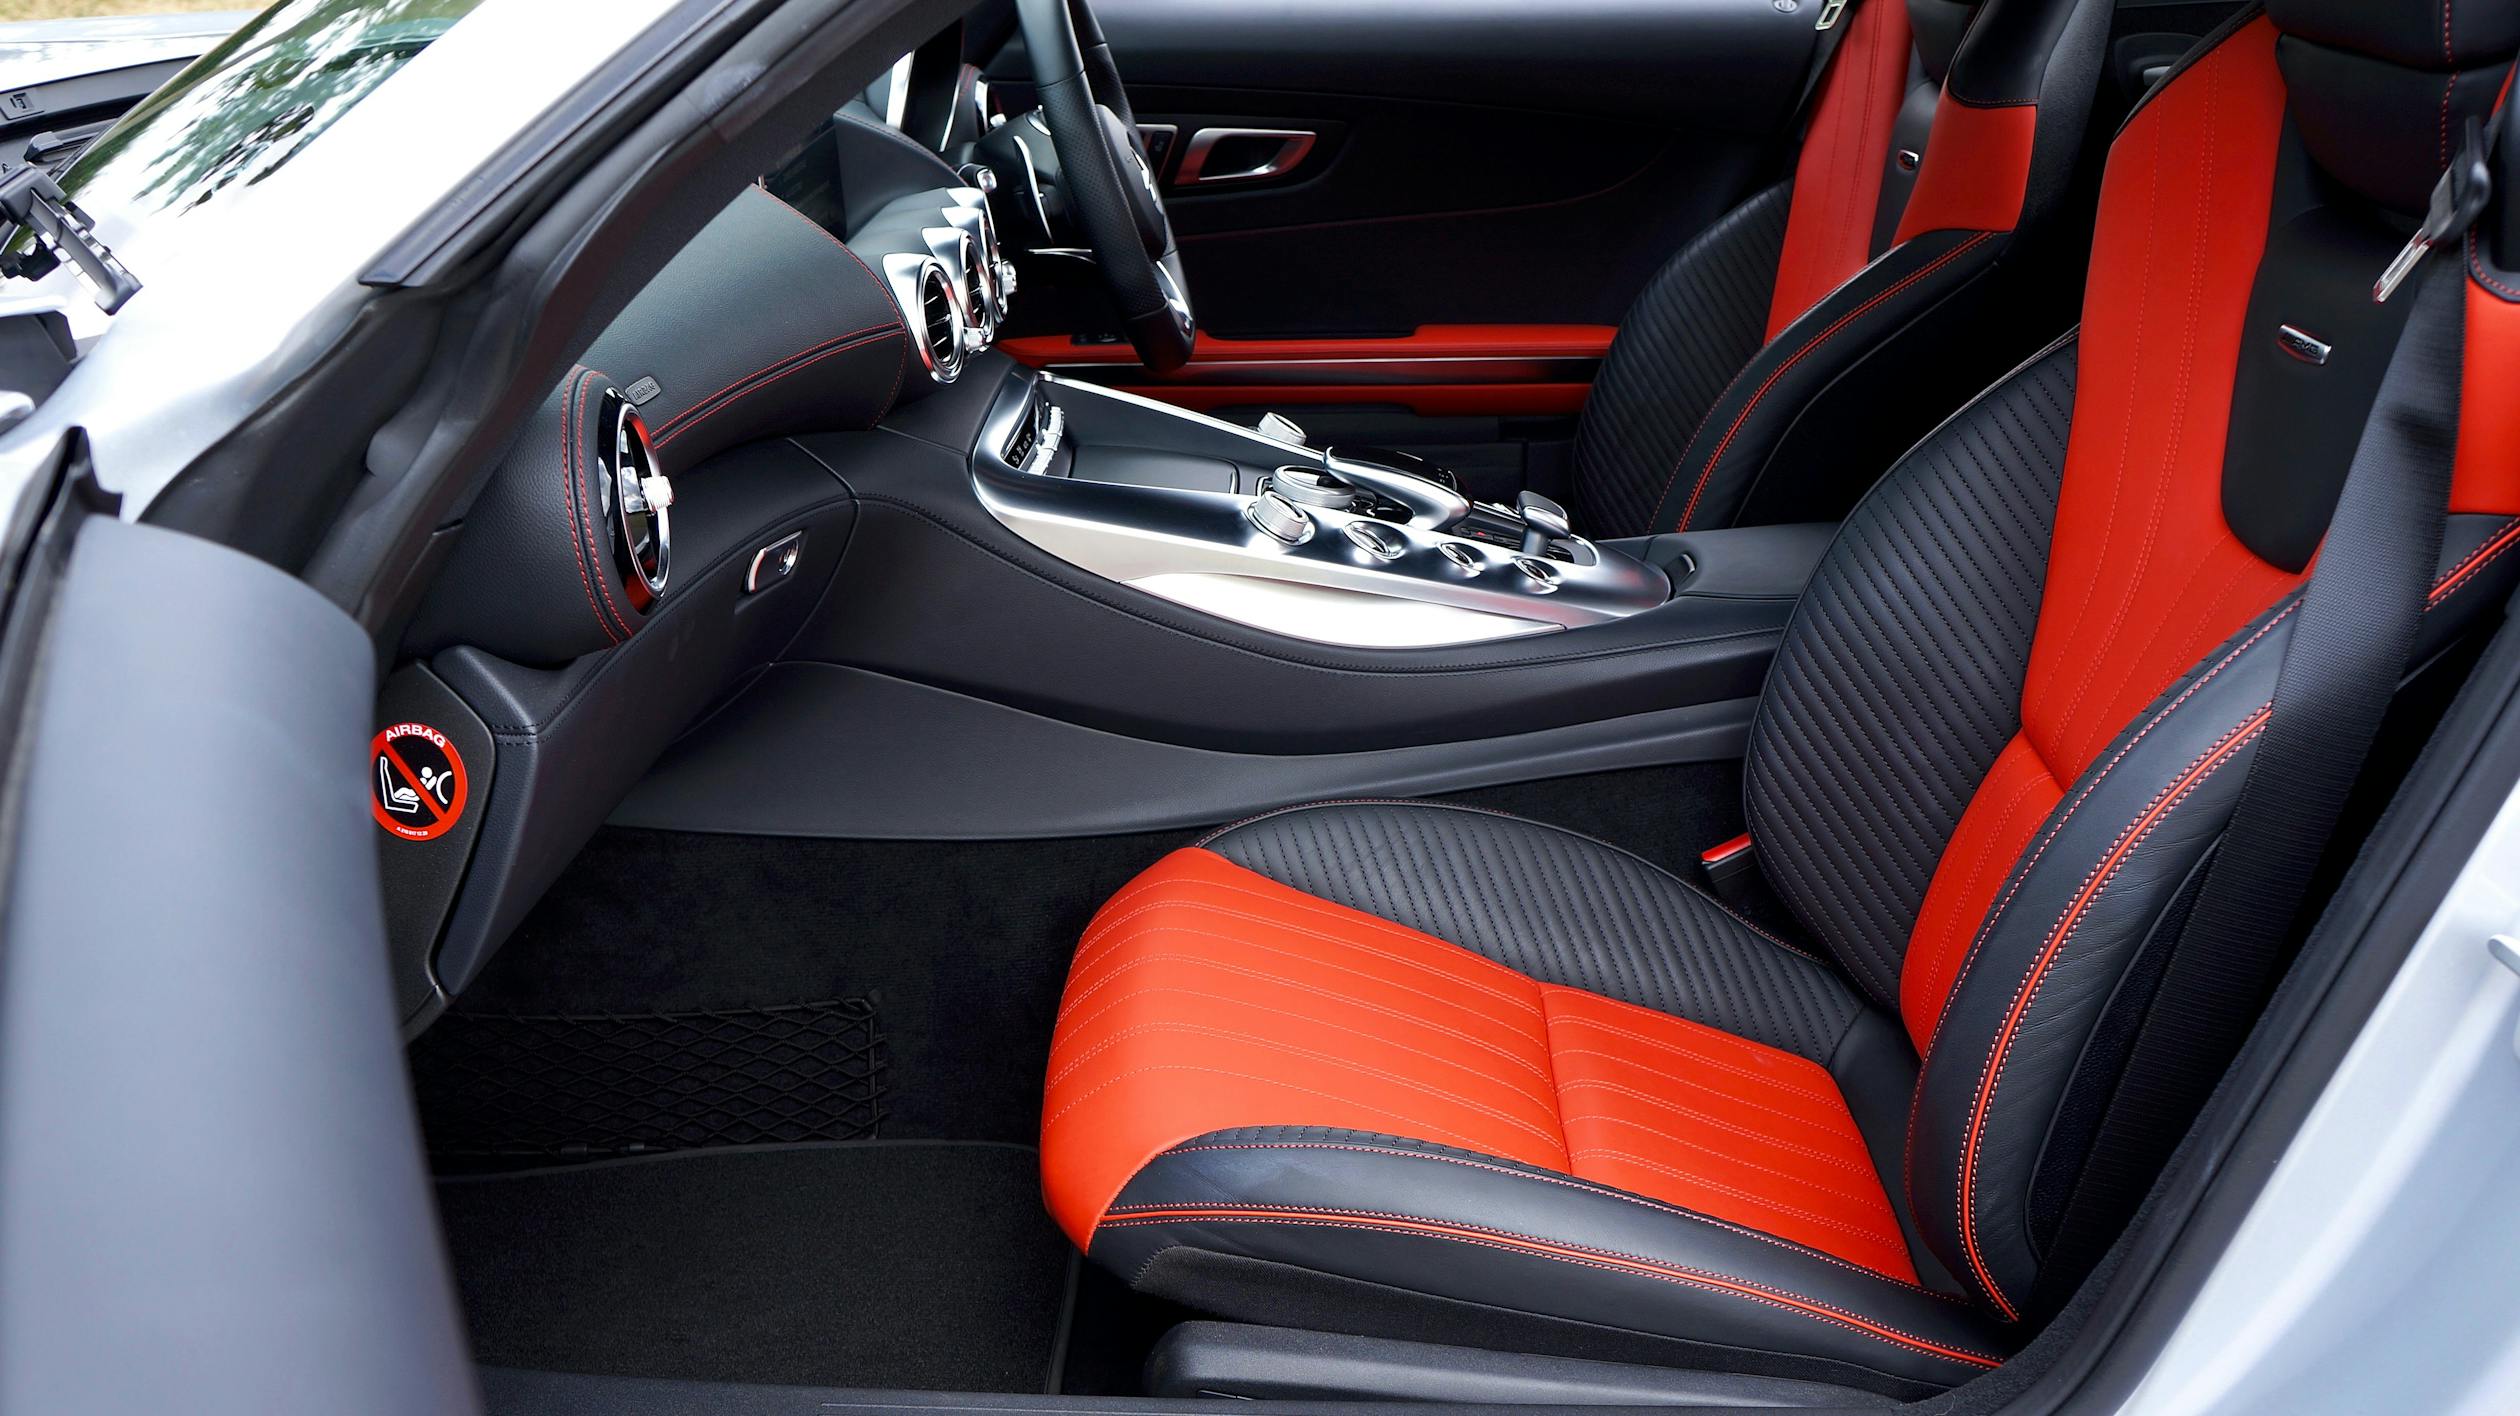 Black and Red Car Interior · Free Stock Photo